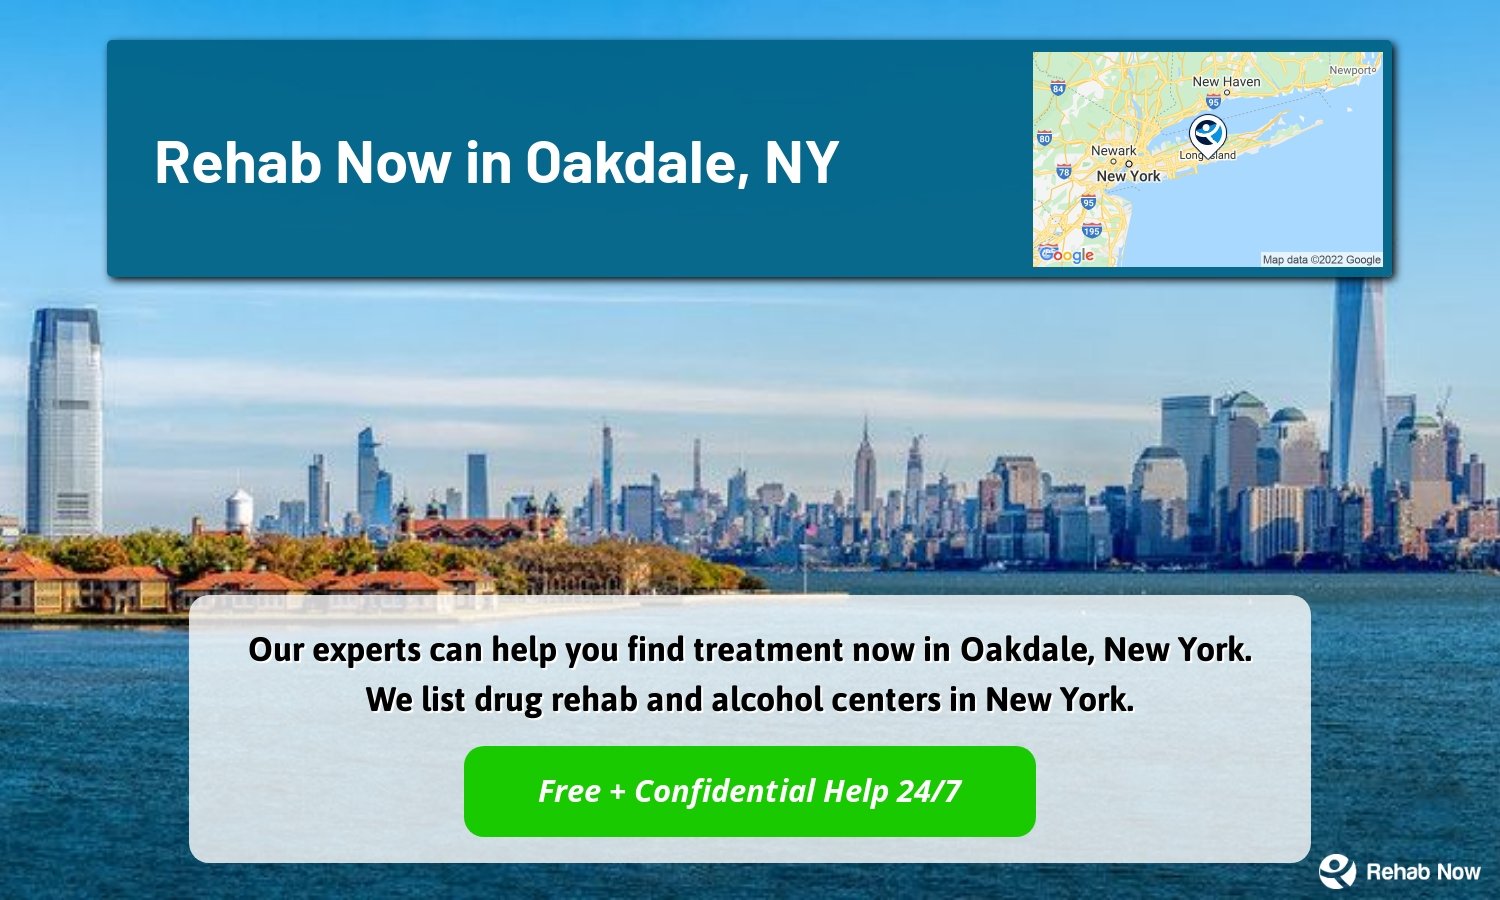 Our experts can help you find treatment now in Oakdale, New York. We list drug rehab and alcohol centers in New York.